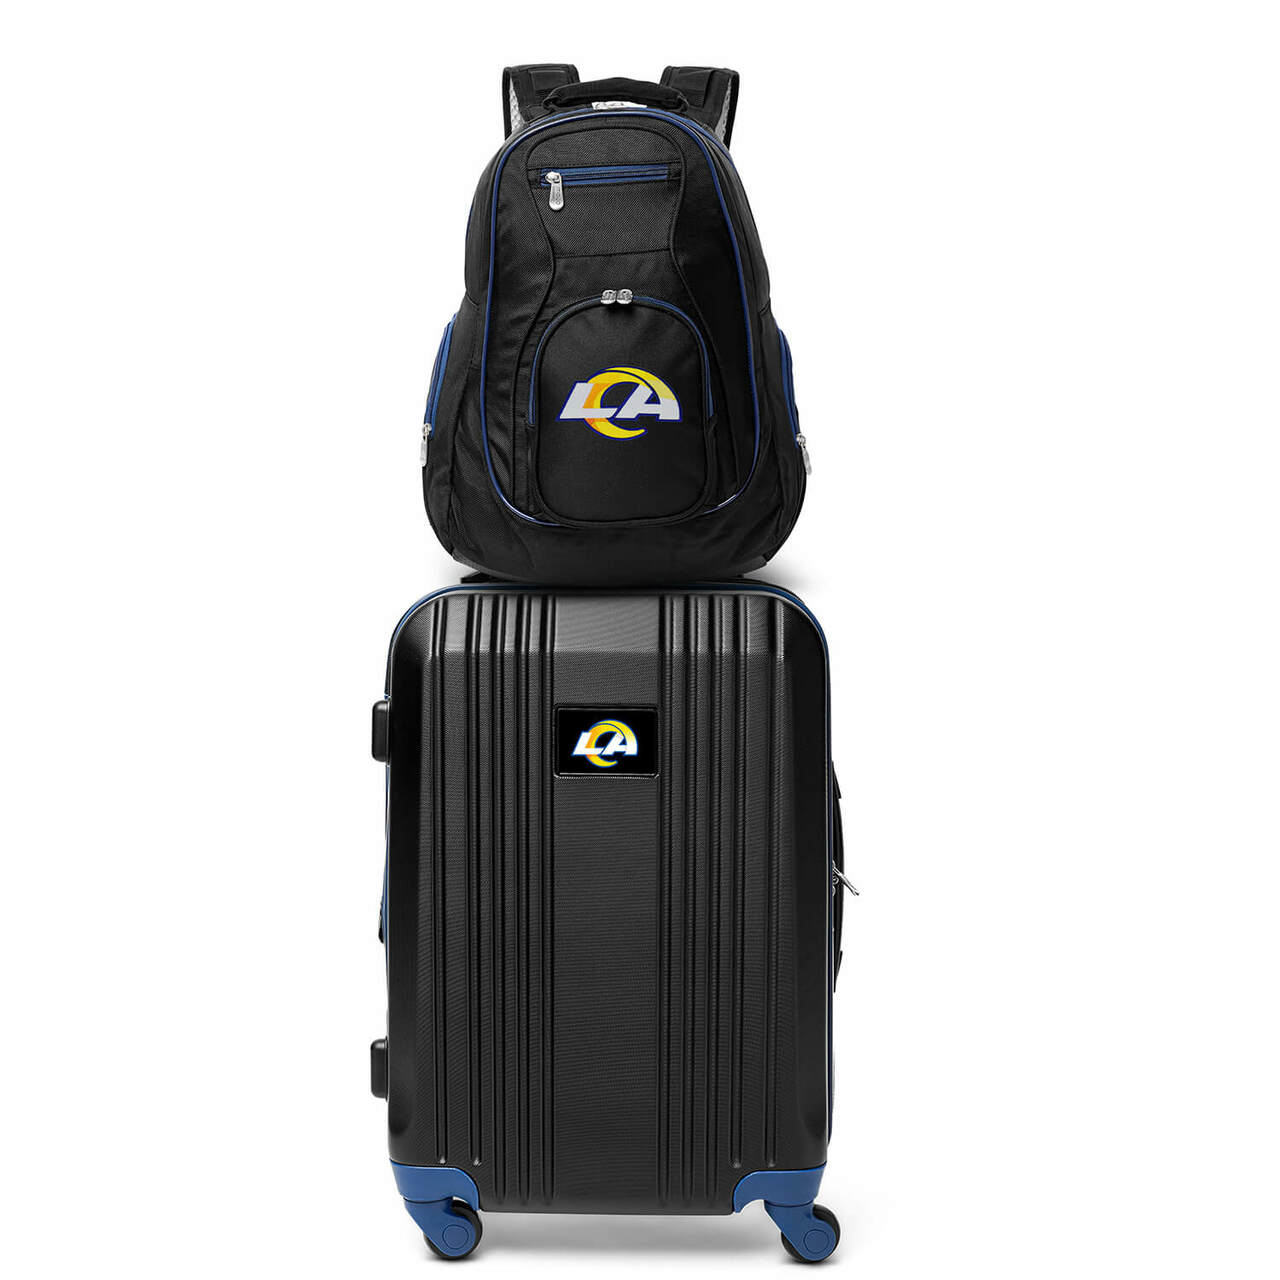 LA Rams 2 Piece Premium Colored Trim Backpack and Luggage Set